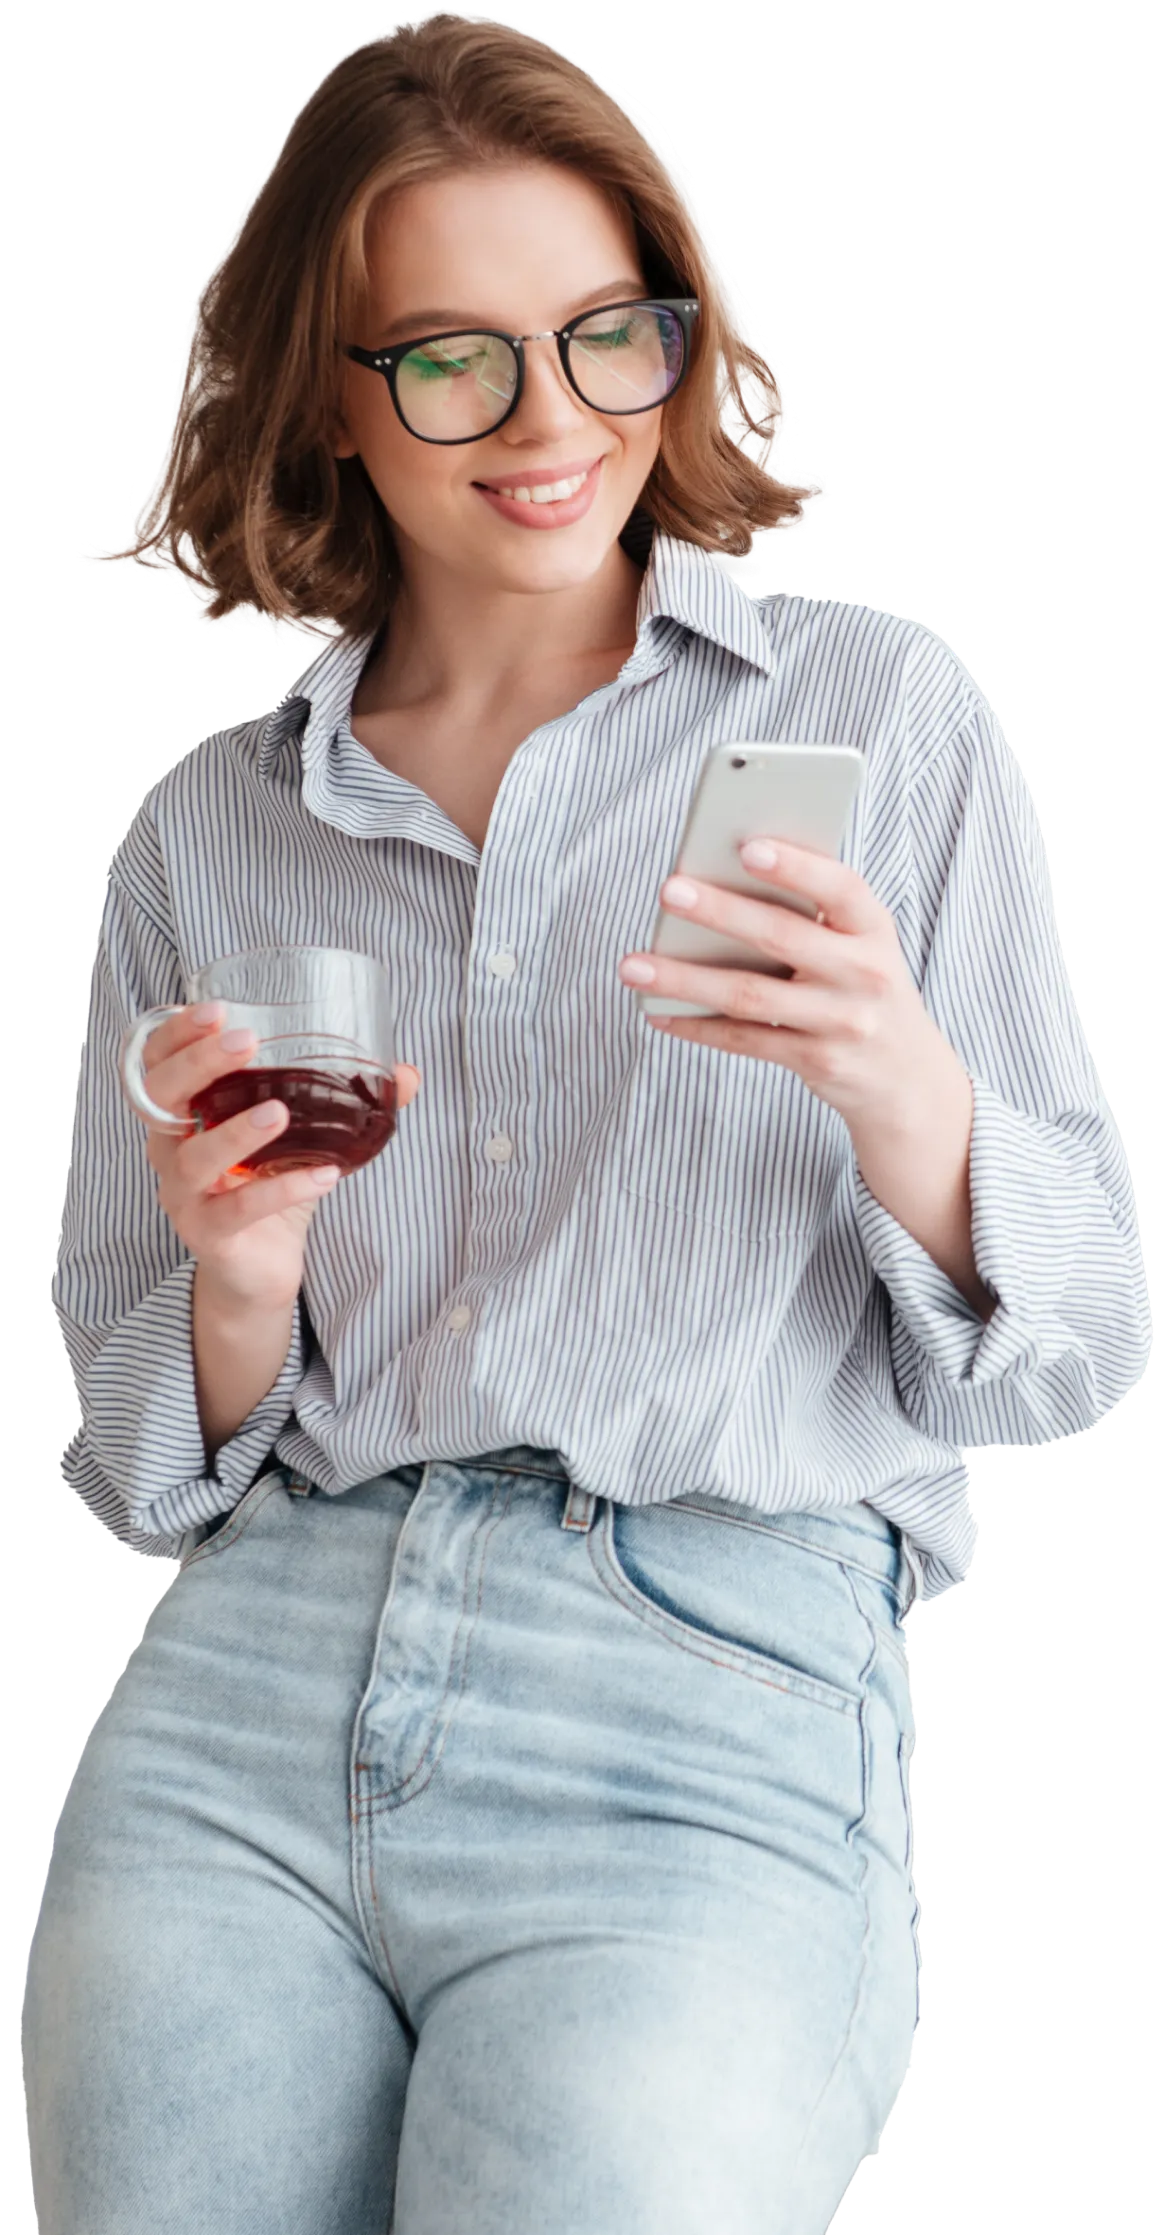 Woman drinking juice looking at phone